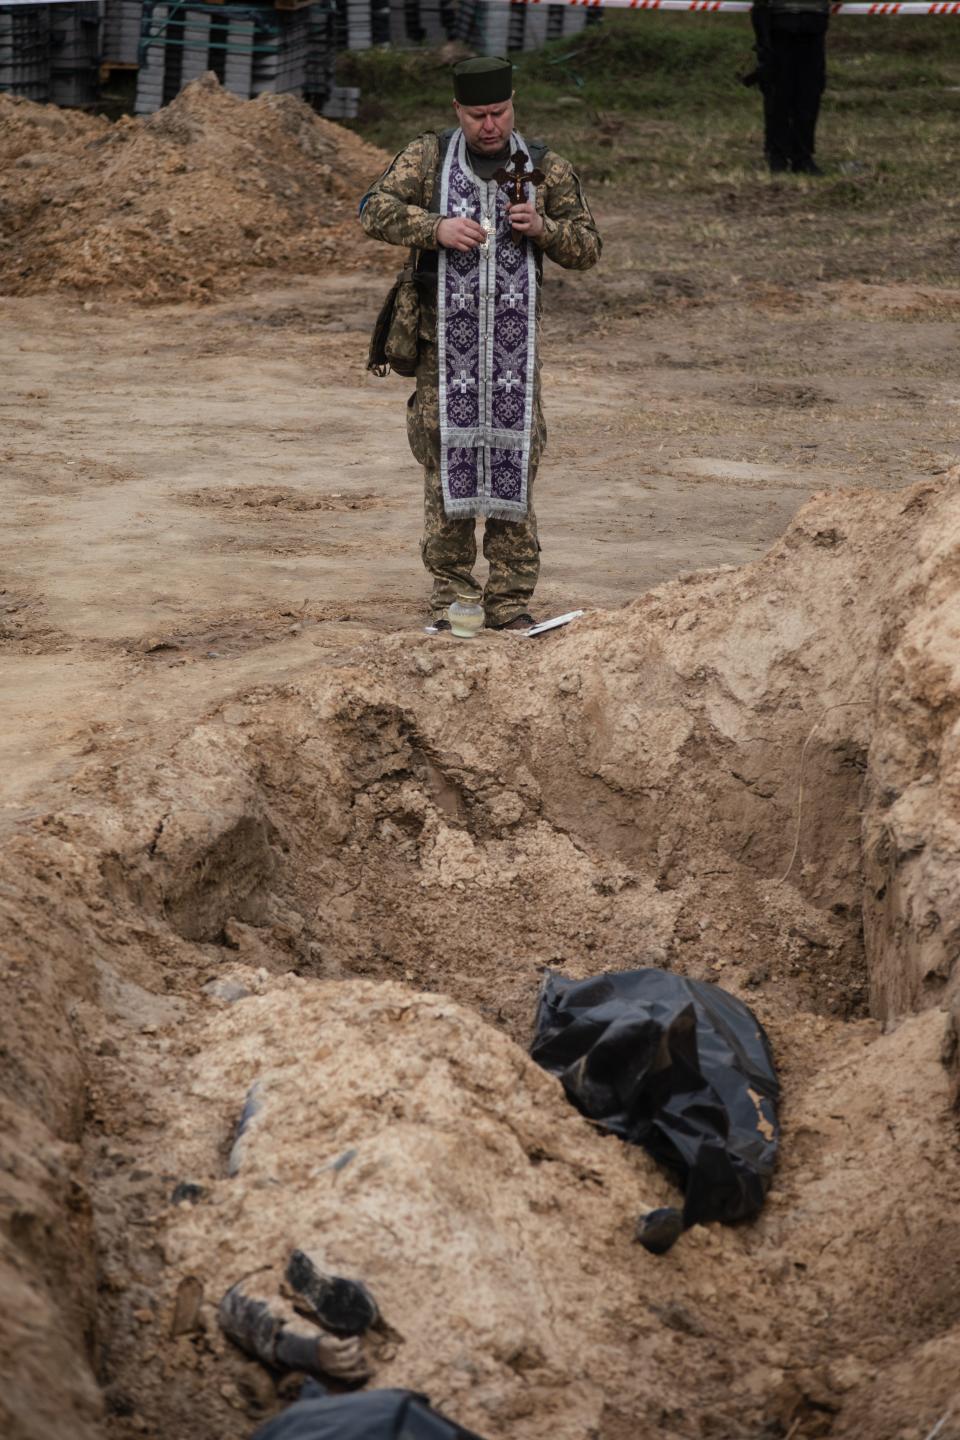 An religious figure with a long robe appears to bless a ditch where bodies, contained in bags, lie below.